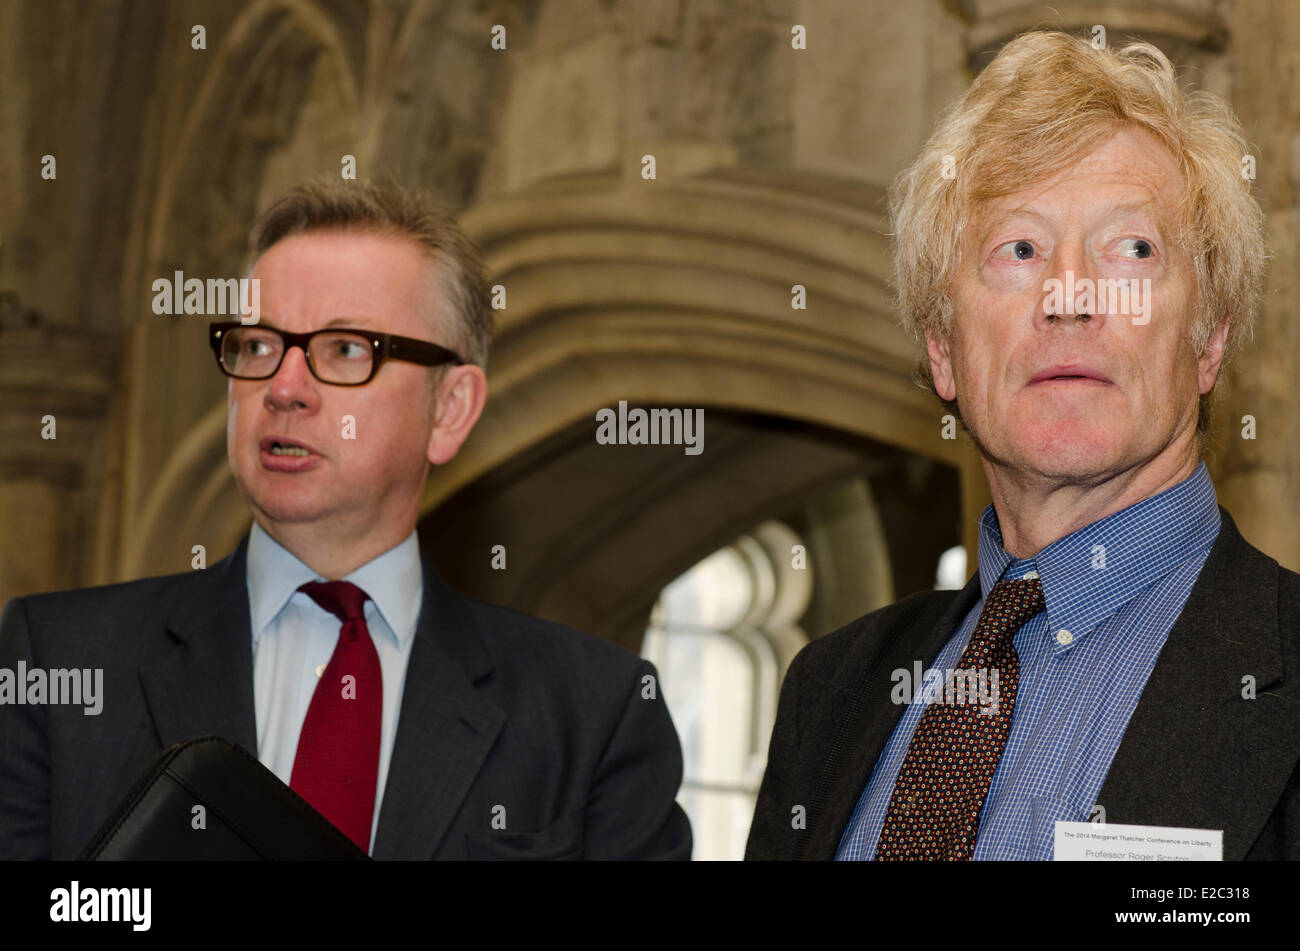 London, UK. 18th June, 2014. Michael Gove Education Secretary and Professor Roger Scruton speakers at the Margaret Thatcher Conference on Liberty, Guildhall, London, UK 18th June 2014 Credit:  Prixnews/Alamy Live News Stock Photo